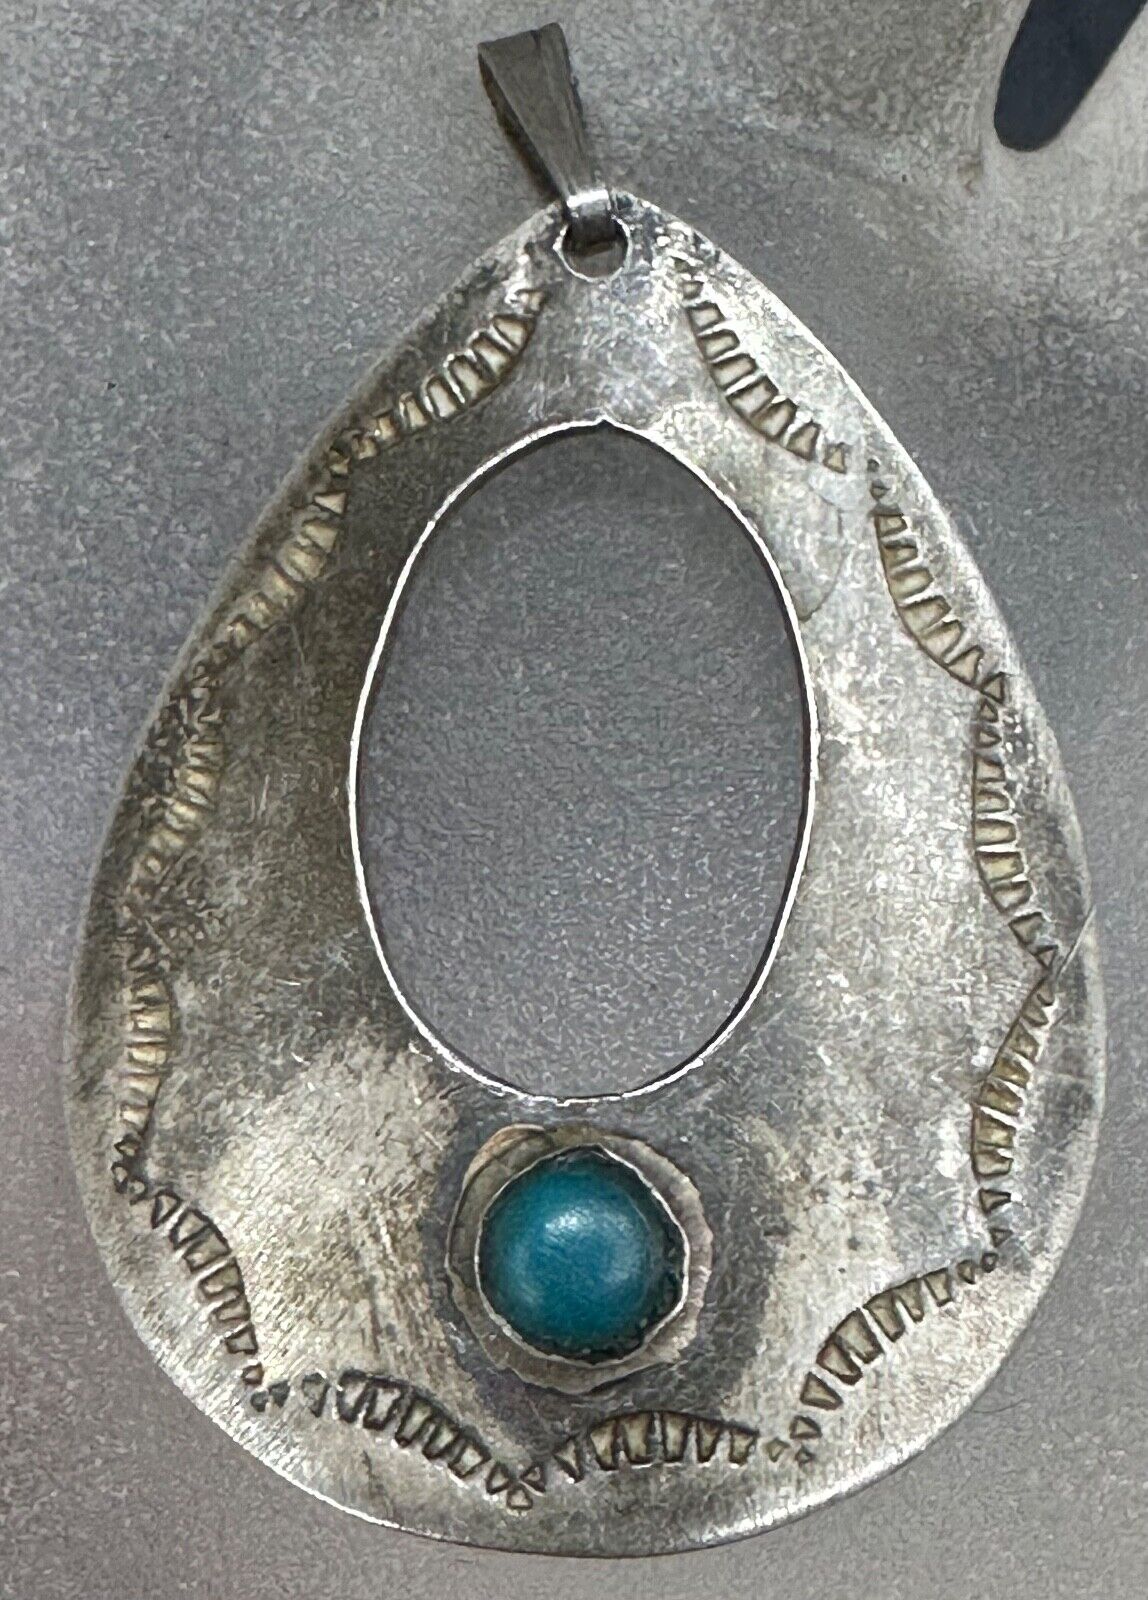 VINTAGE NAVAJO STERLING SILVER TURQUOISE STAMPED TEAR DROP PENDANT CHARM